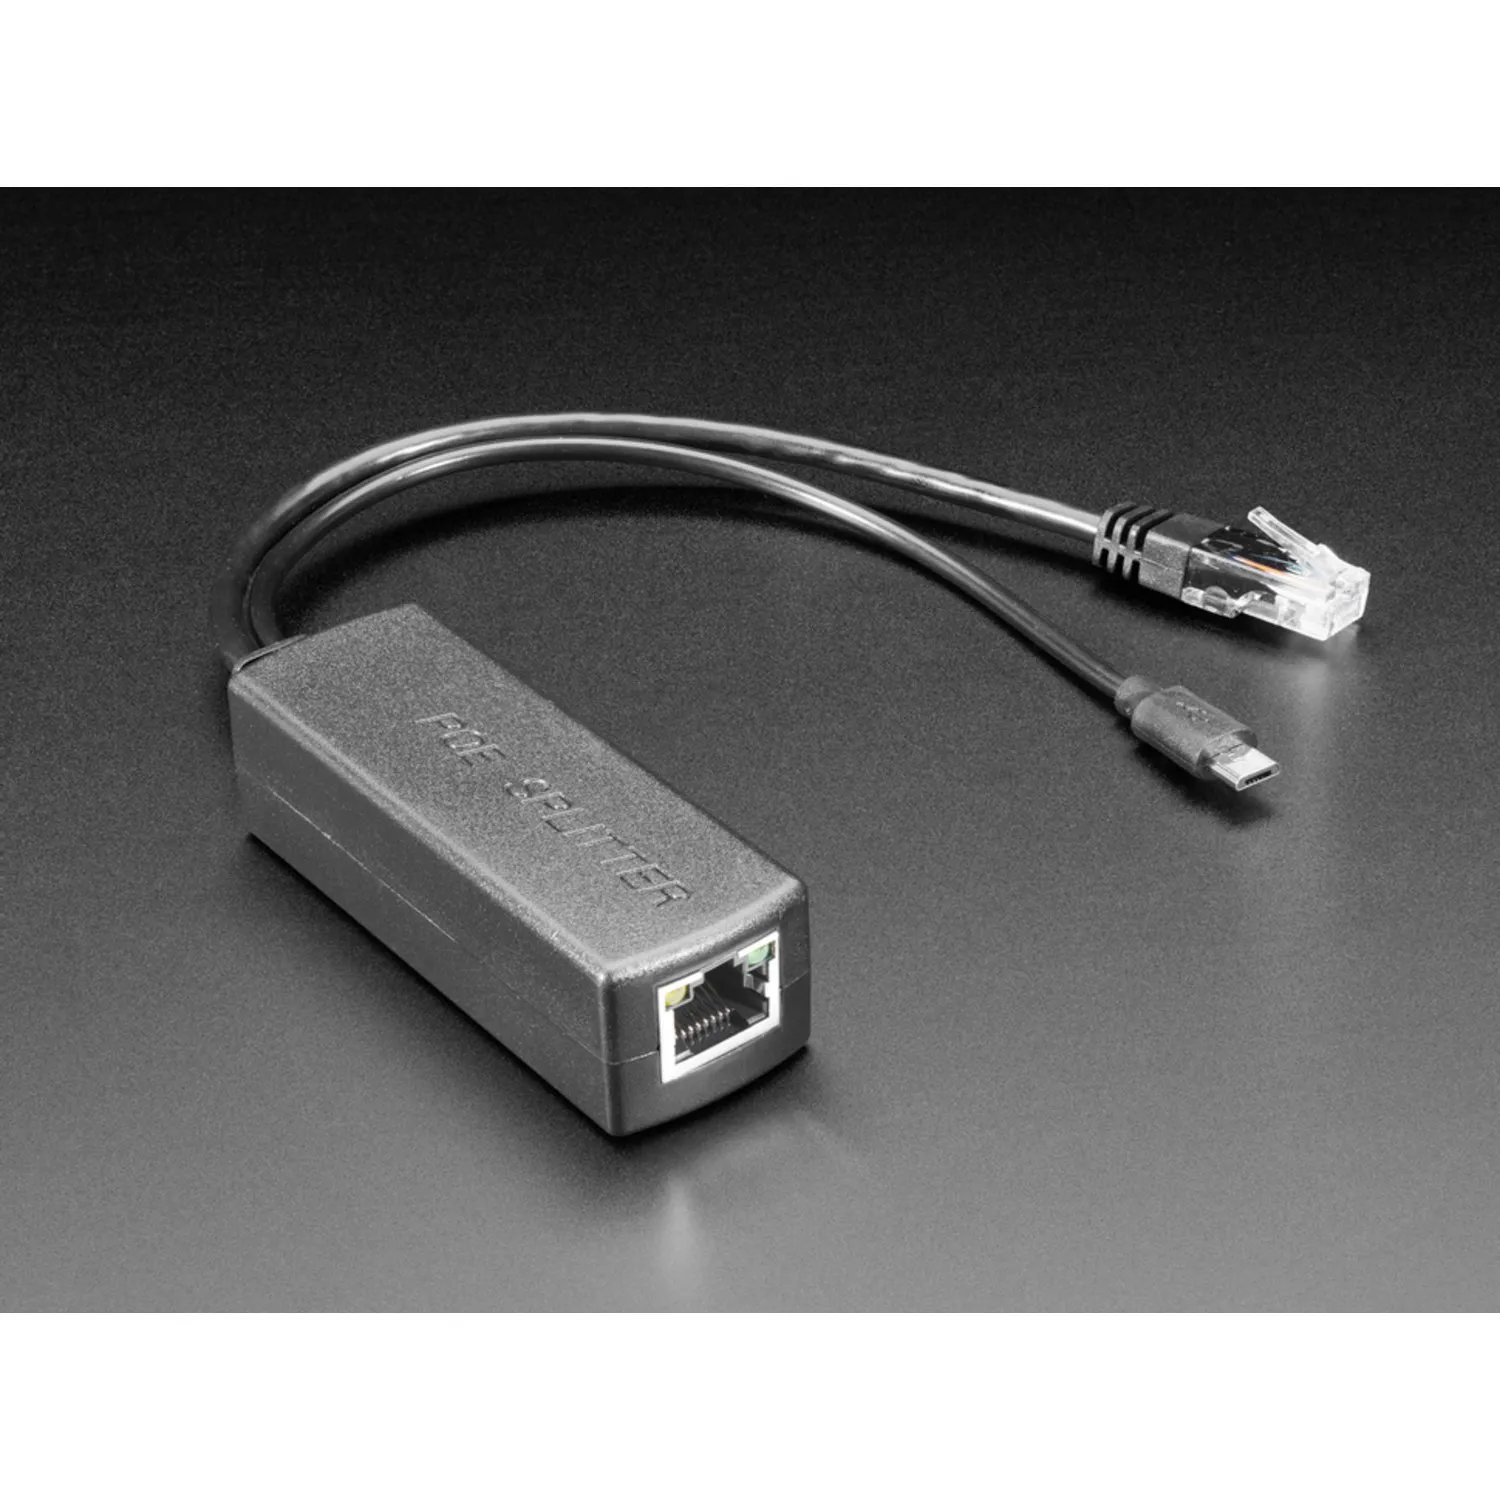 Photo of PoE Splitter with MicroUSB Plug - Isolated 12W - 5V 2.4 Amp